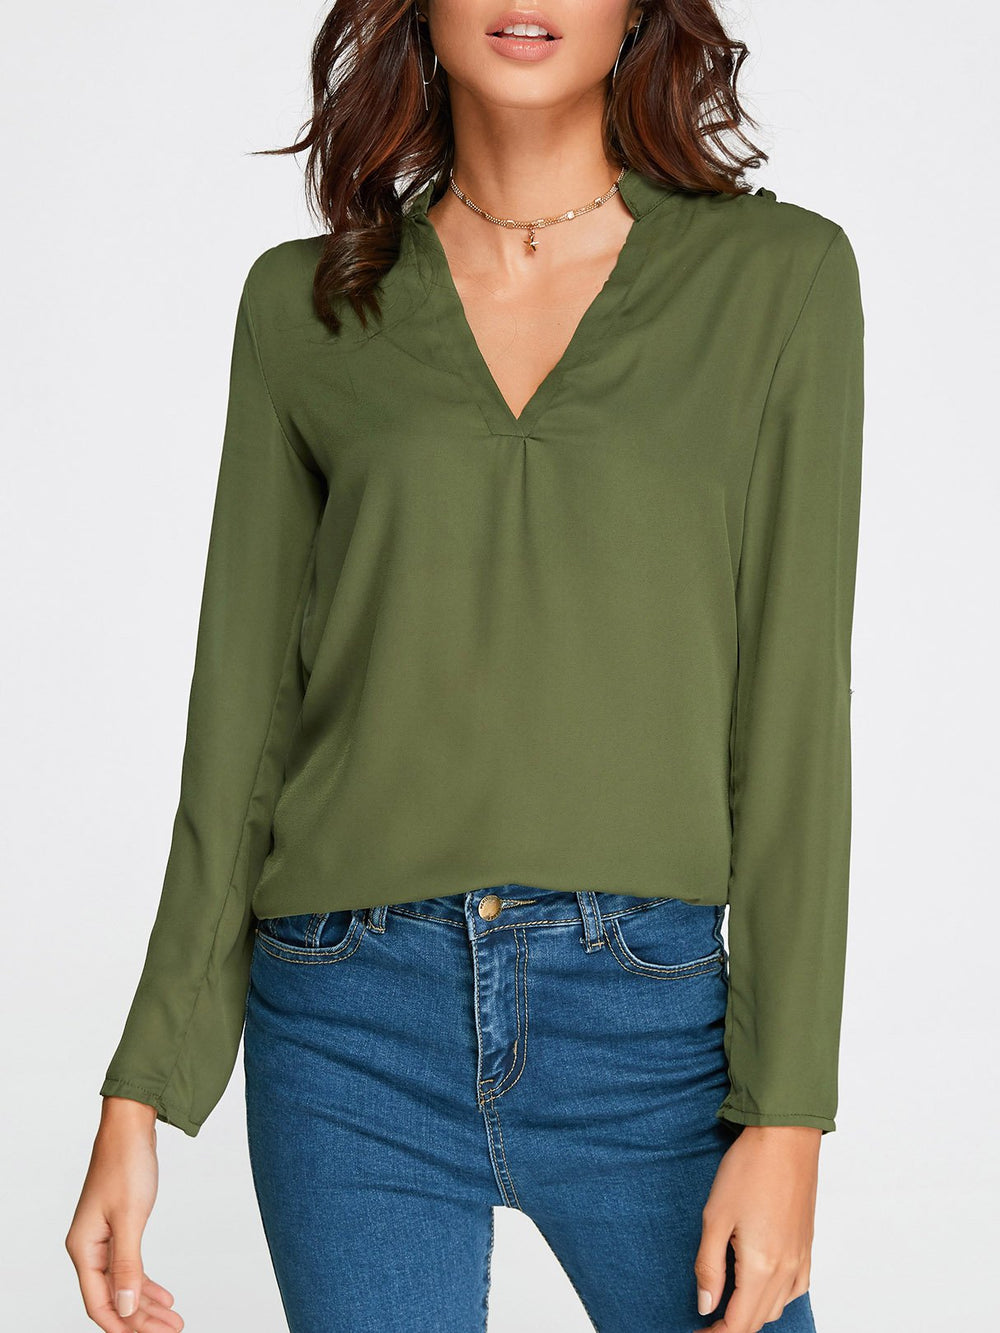 V-Neck Cut Out Long Sleeve Green Top